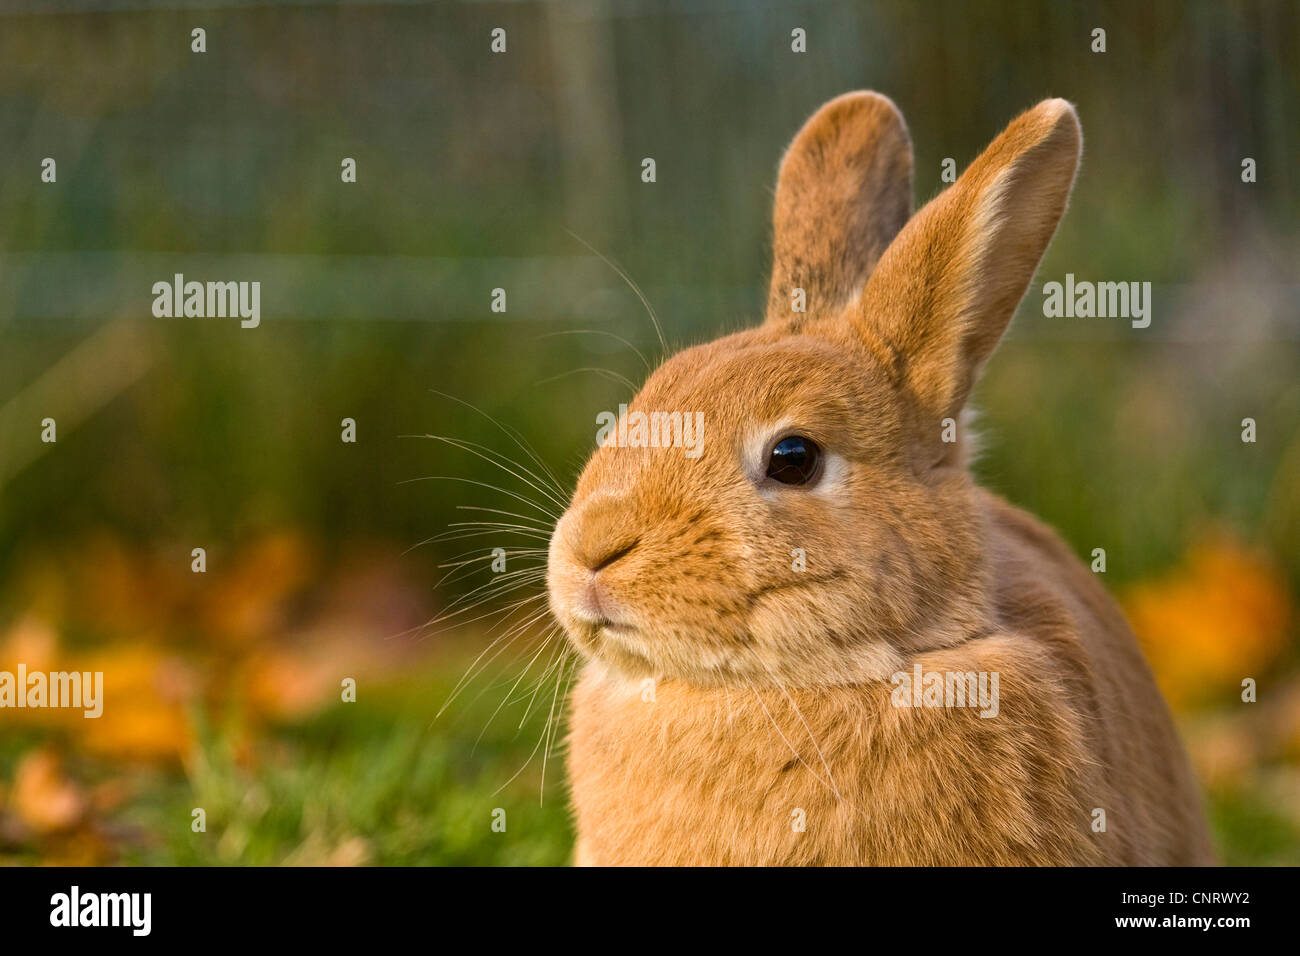 Lapin nain (Oryctolagus cuniculus f. domestica), lapin nain rouge, portrait Banque D'Images